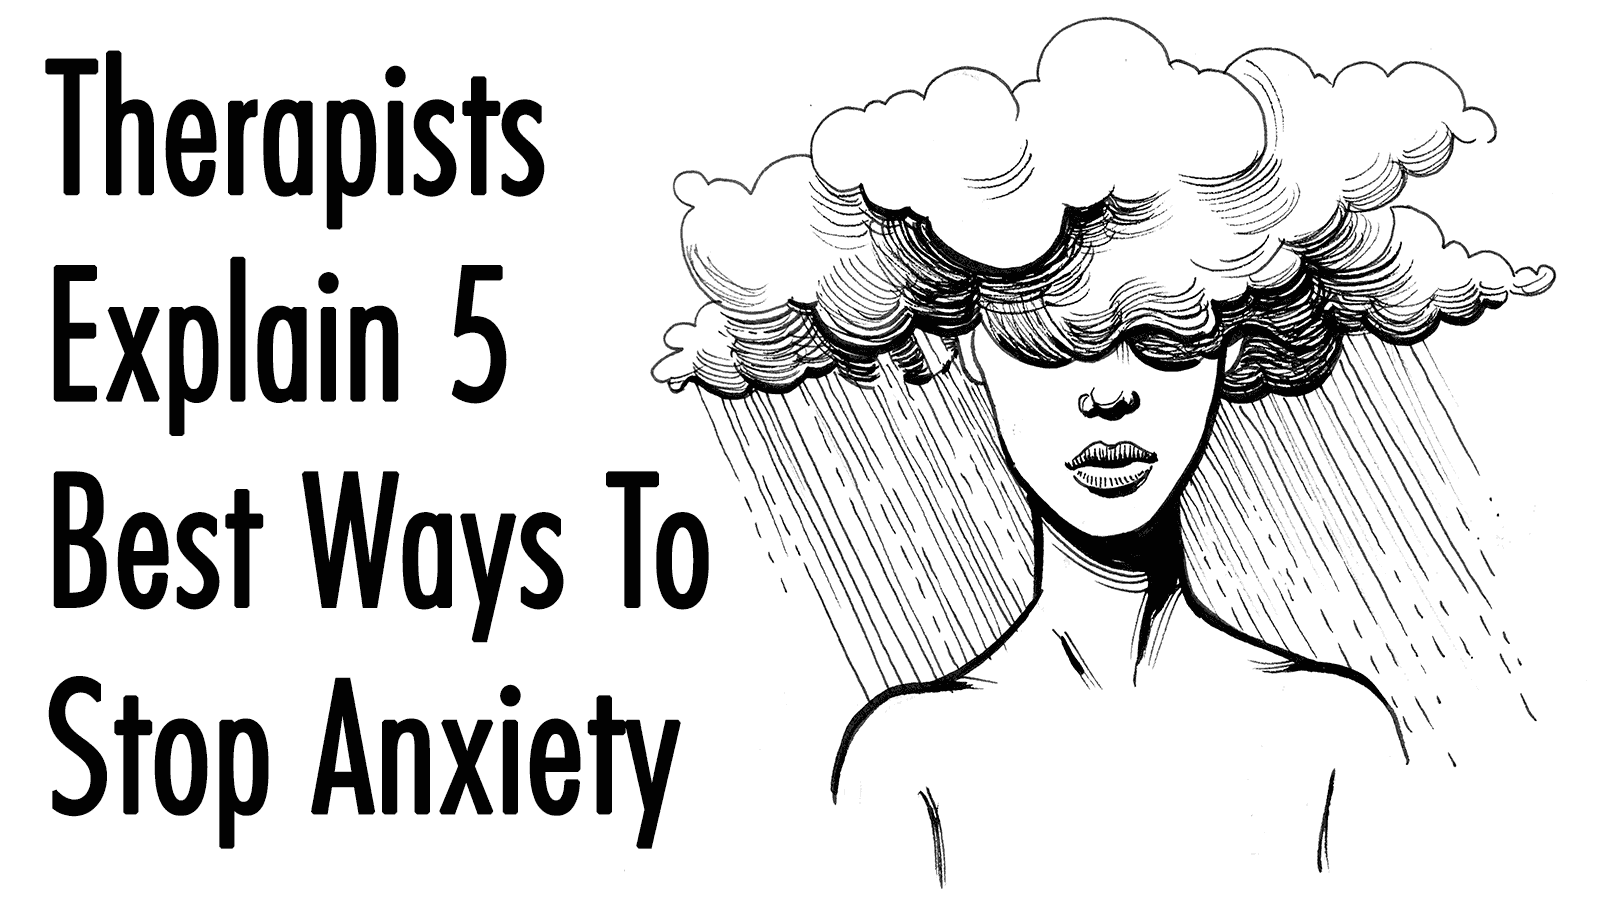 Therapists Explain 5 Best Ways To Stop Anxiety